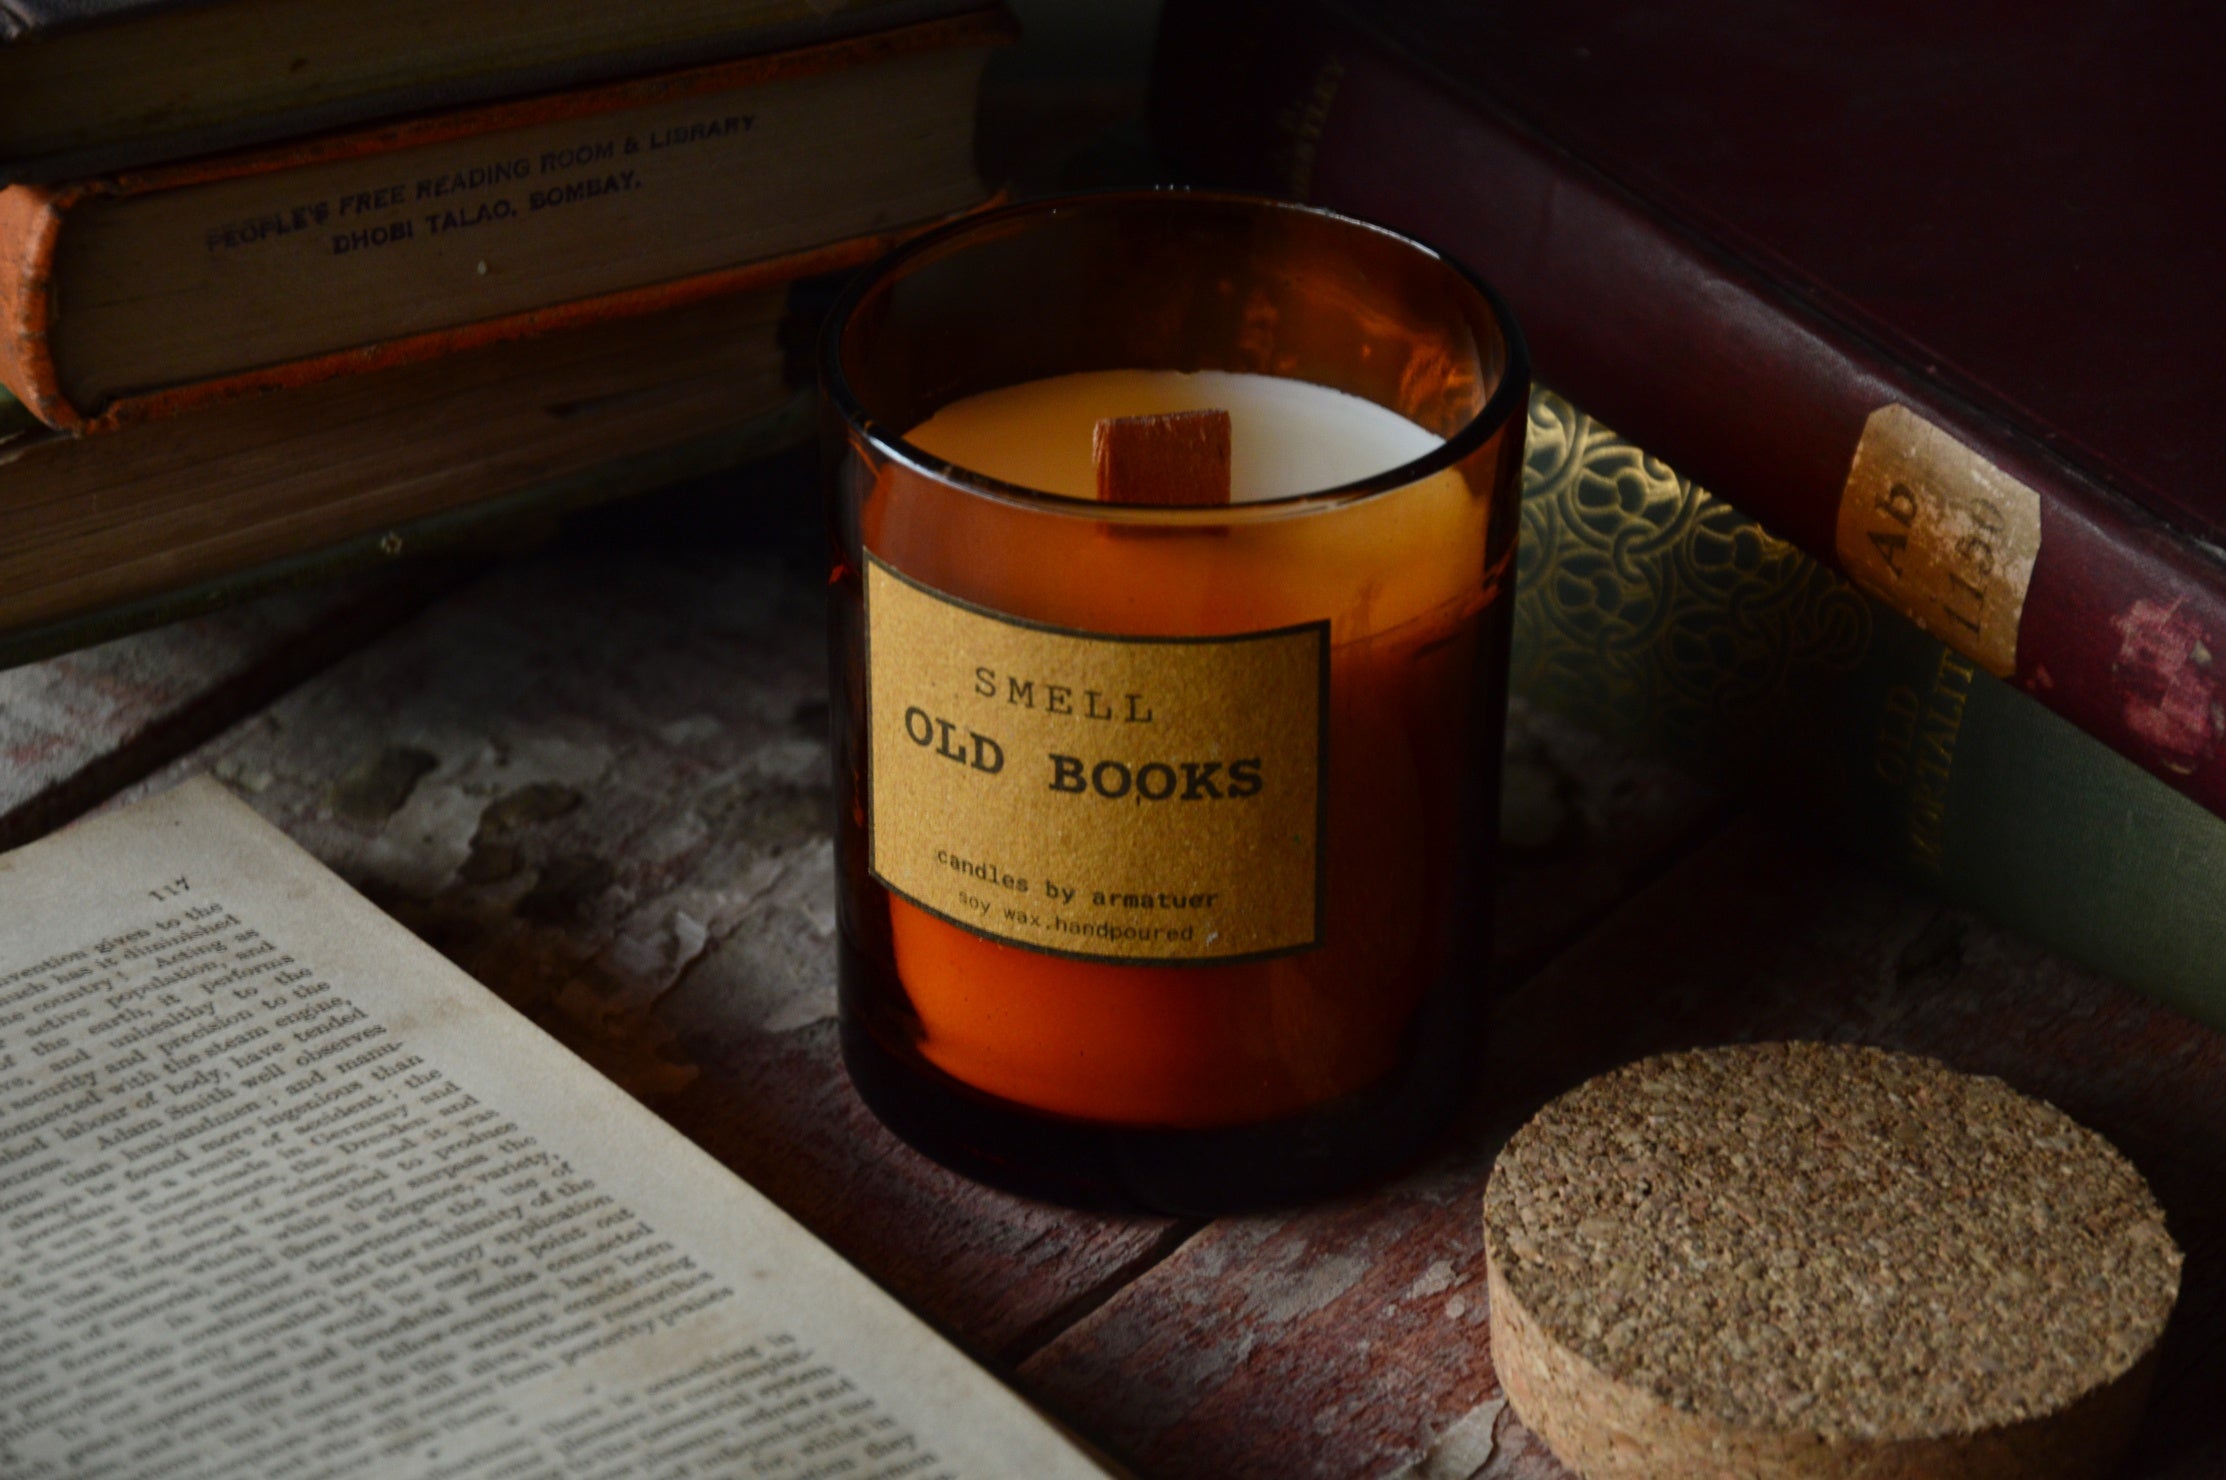 Smell Old Books | Woodwick candle that smells like books